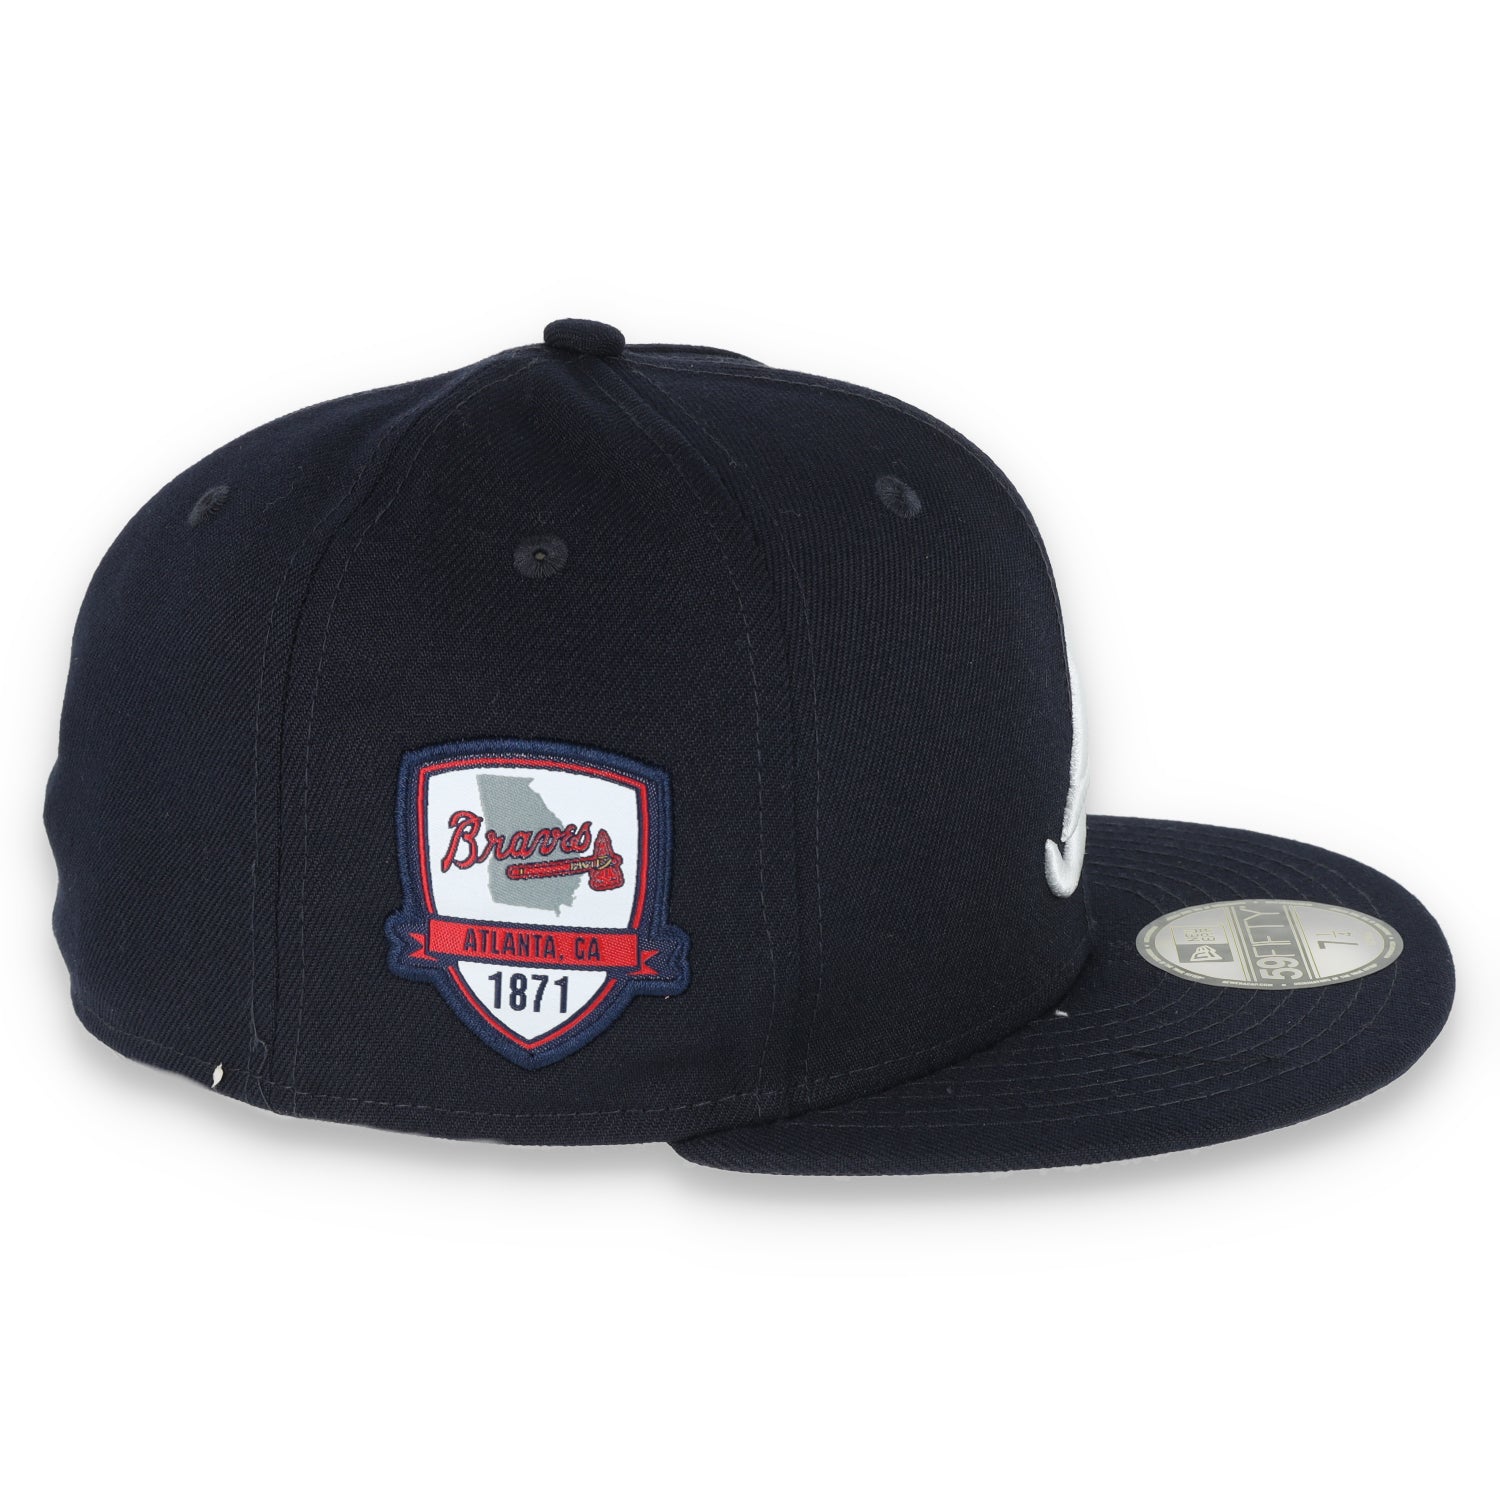 NEW ERA ATLANTA BRAVES INAUGURAL SEASON PATCH 59FIFTY FITTED HAT